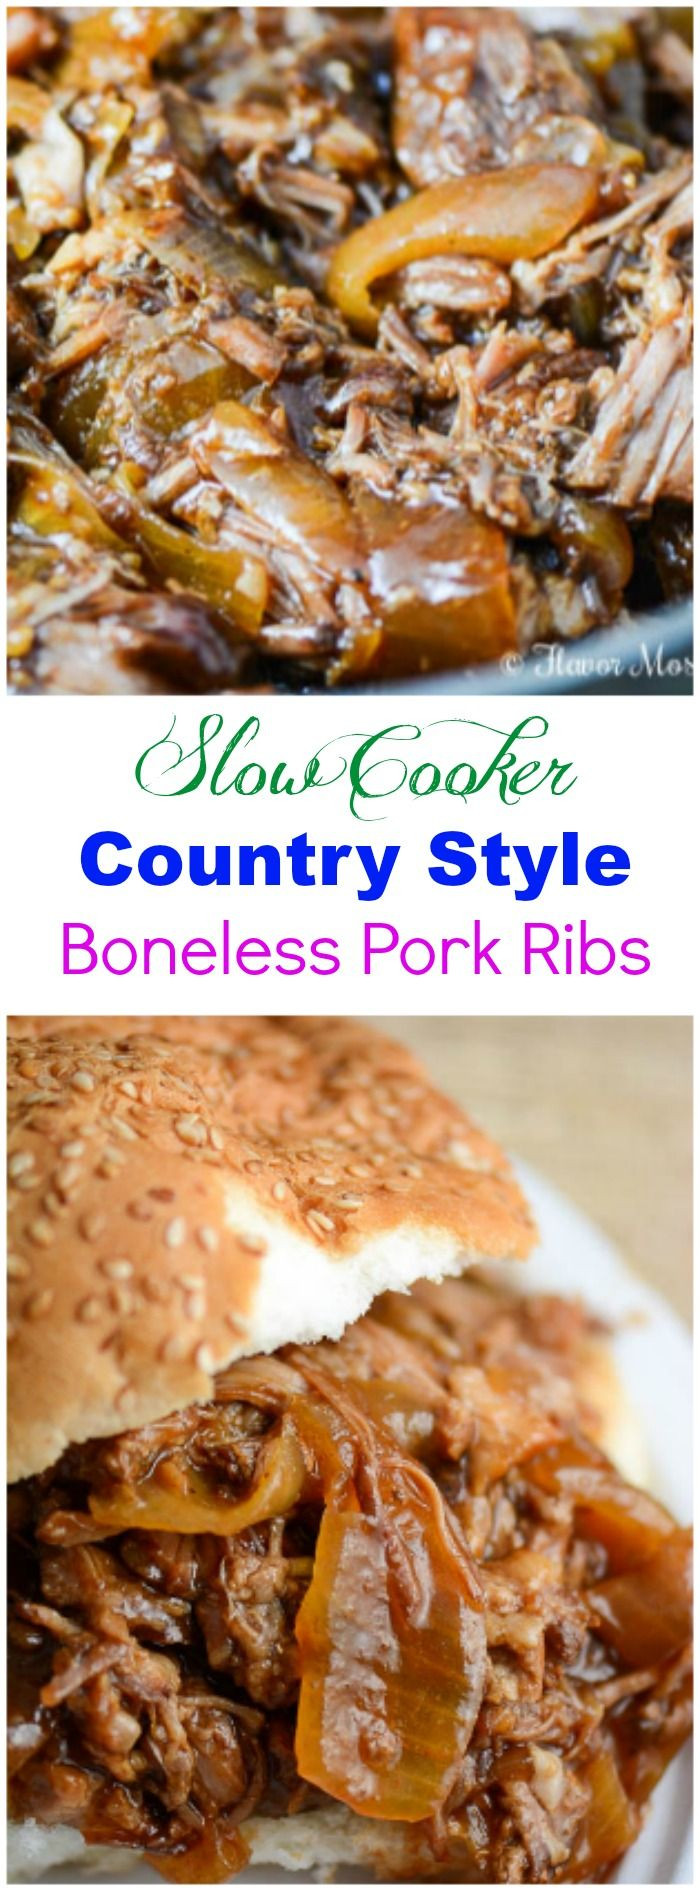 Country Style Pork Ribs Slow Cooker Beer
 Slow Cooker Country Style Boneless Pork Ribs